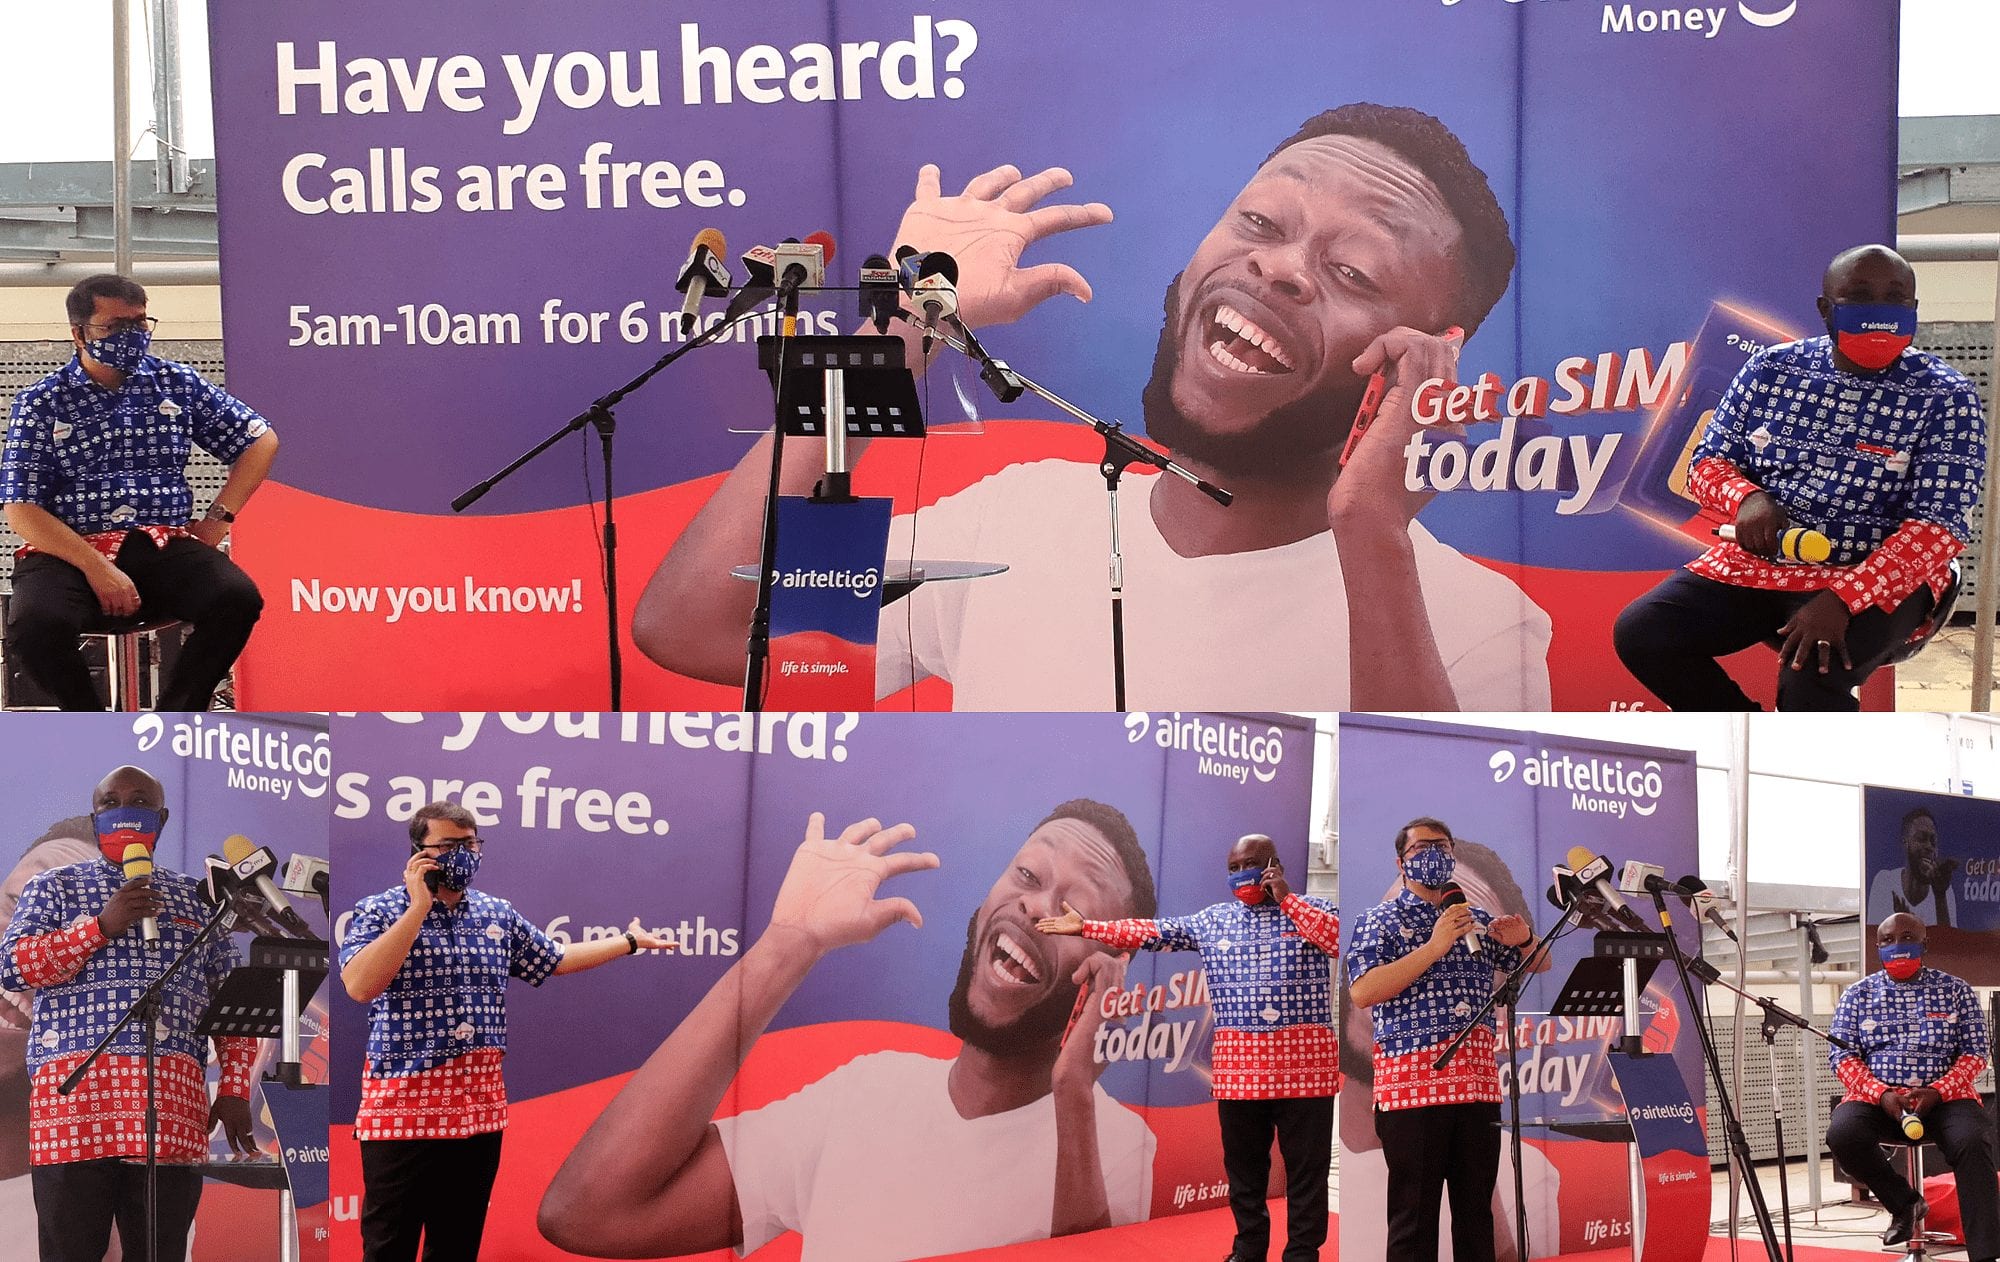 How to activate airteltigo free morning offer for 6 months unlimited talk